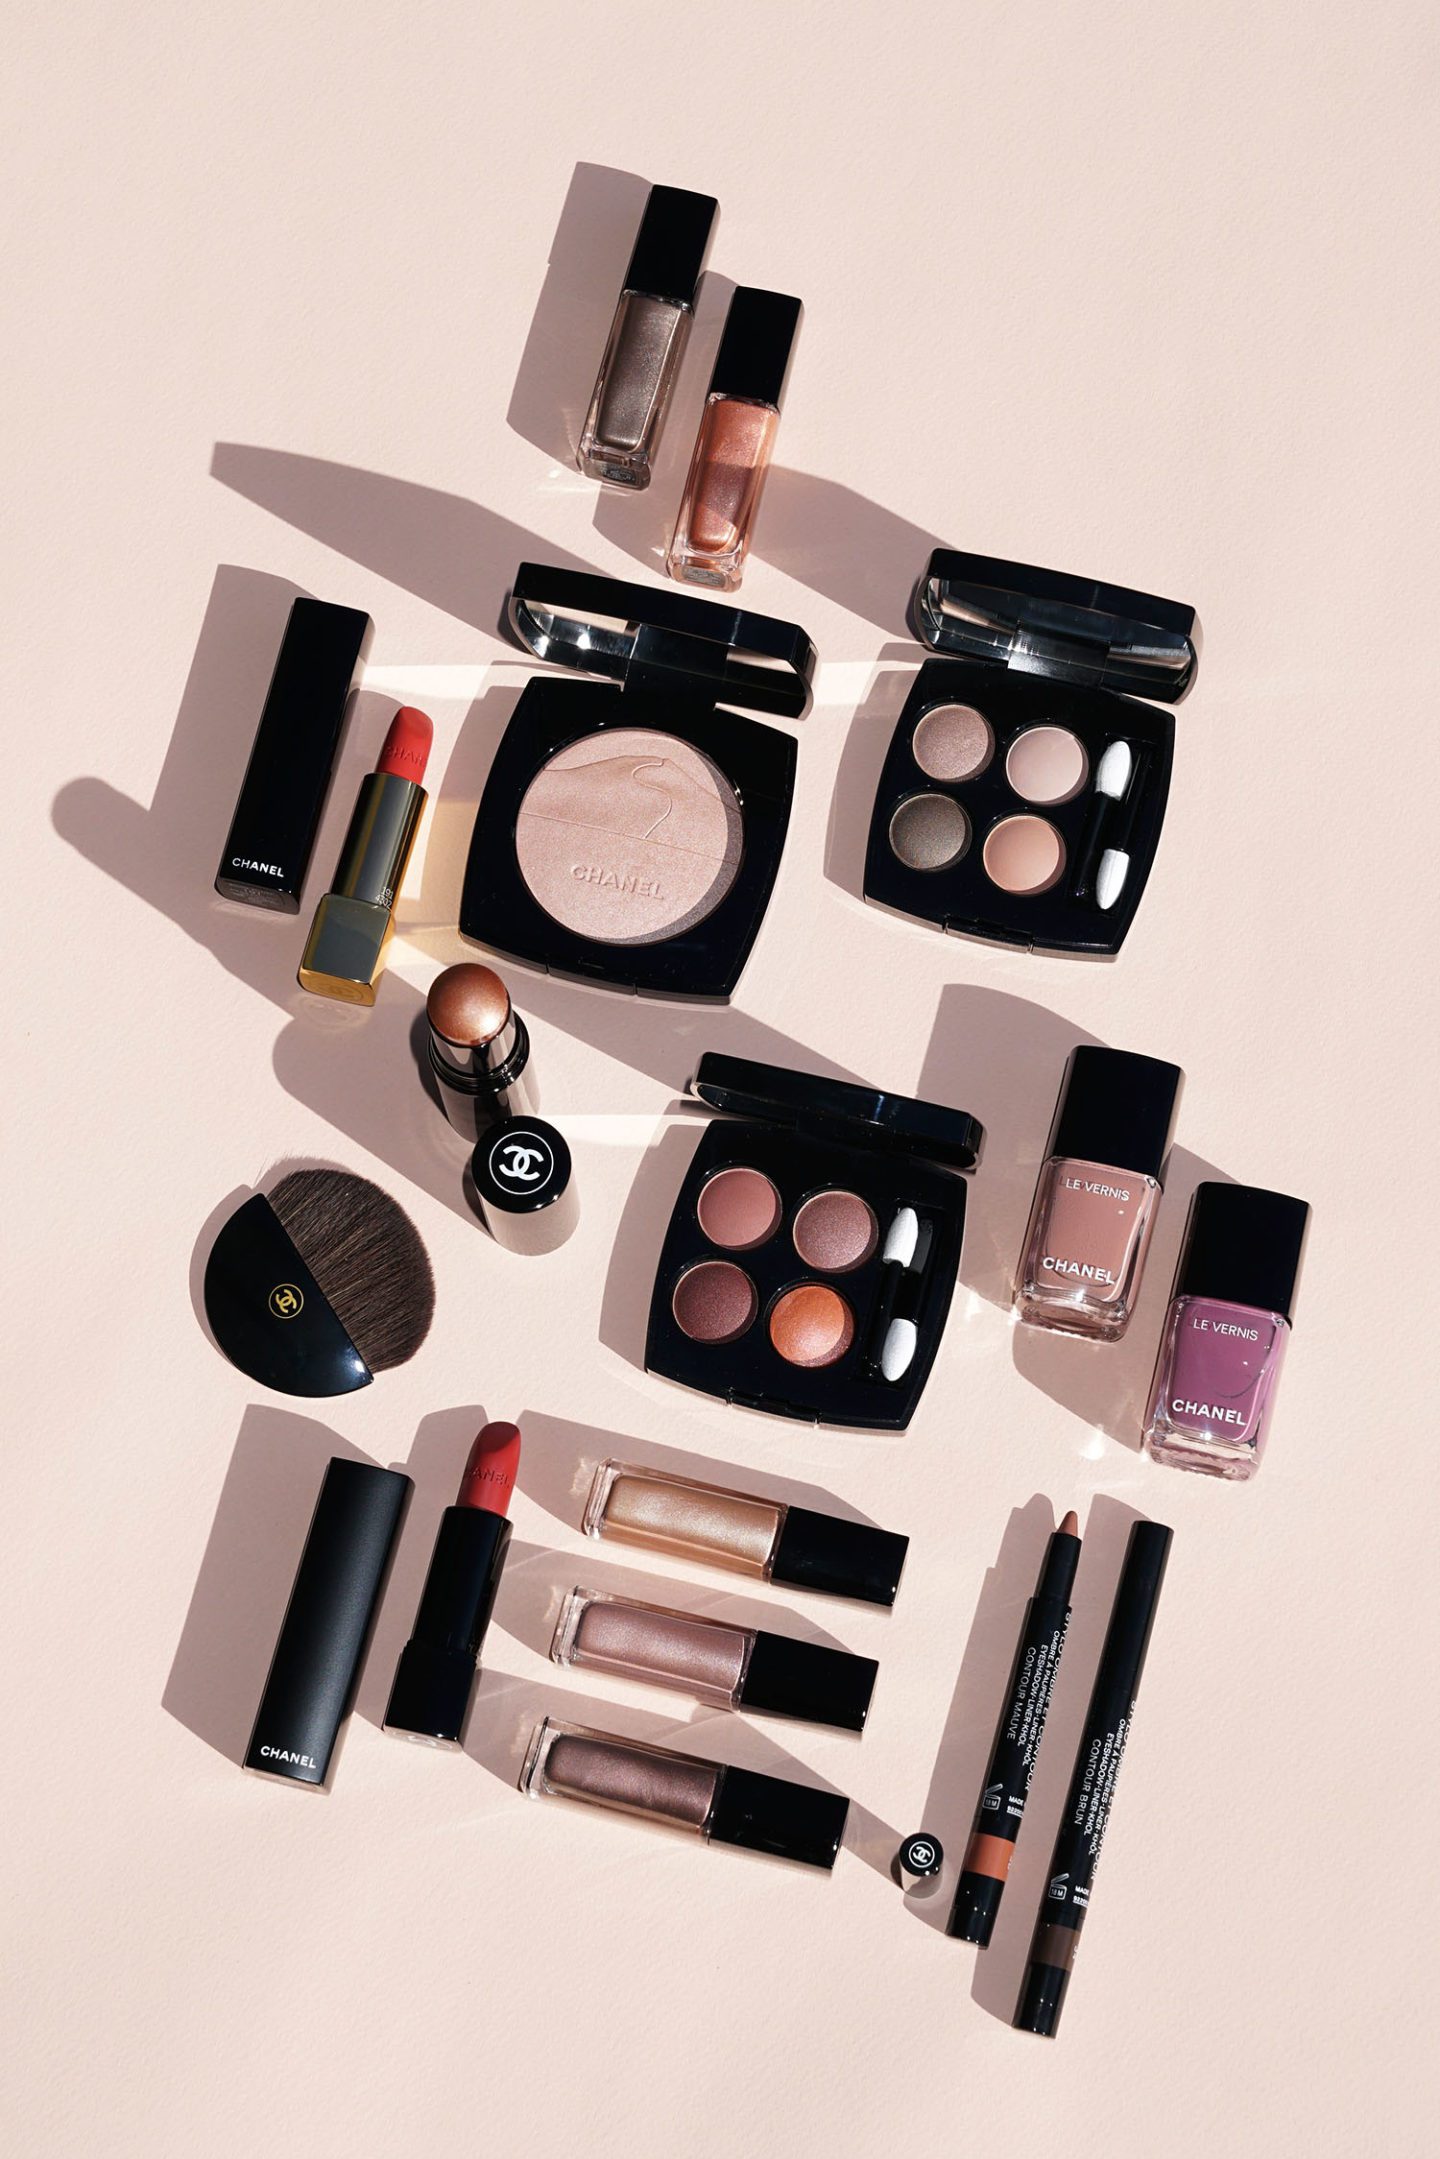 Chanel Spring-Summer 2020 makeup collection